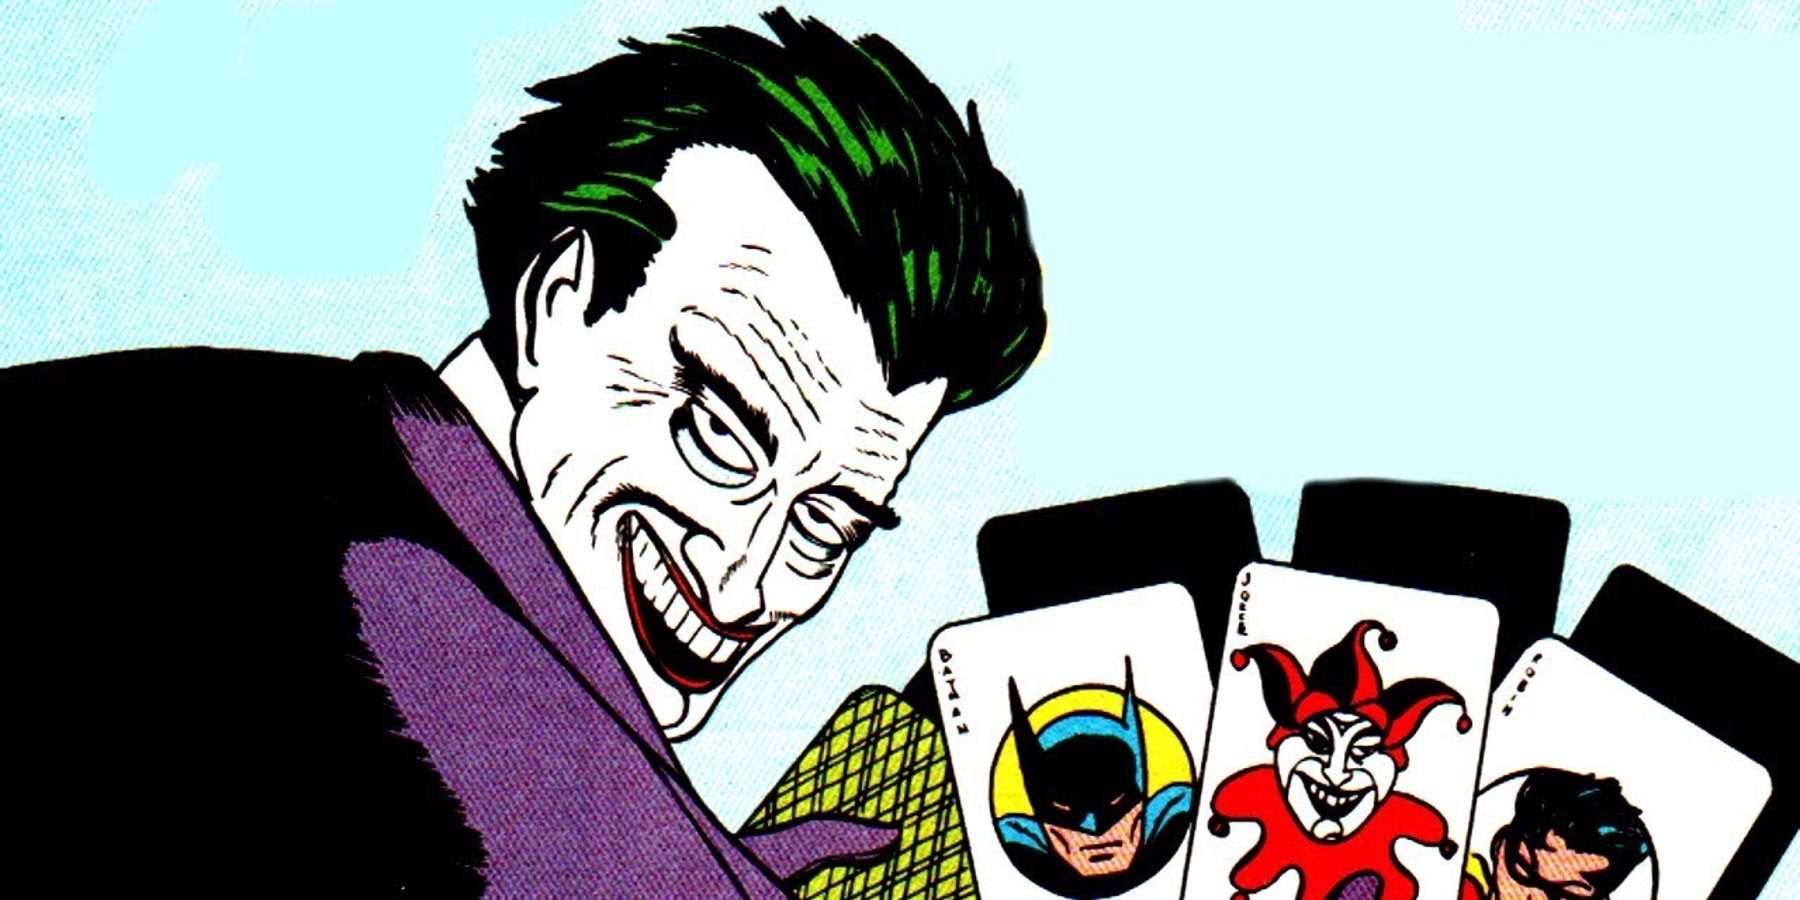 The Joker making his first appearance in Detective Comics 1940